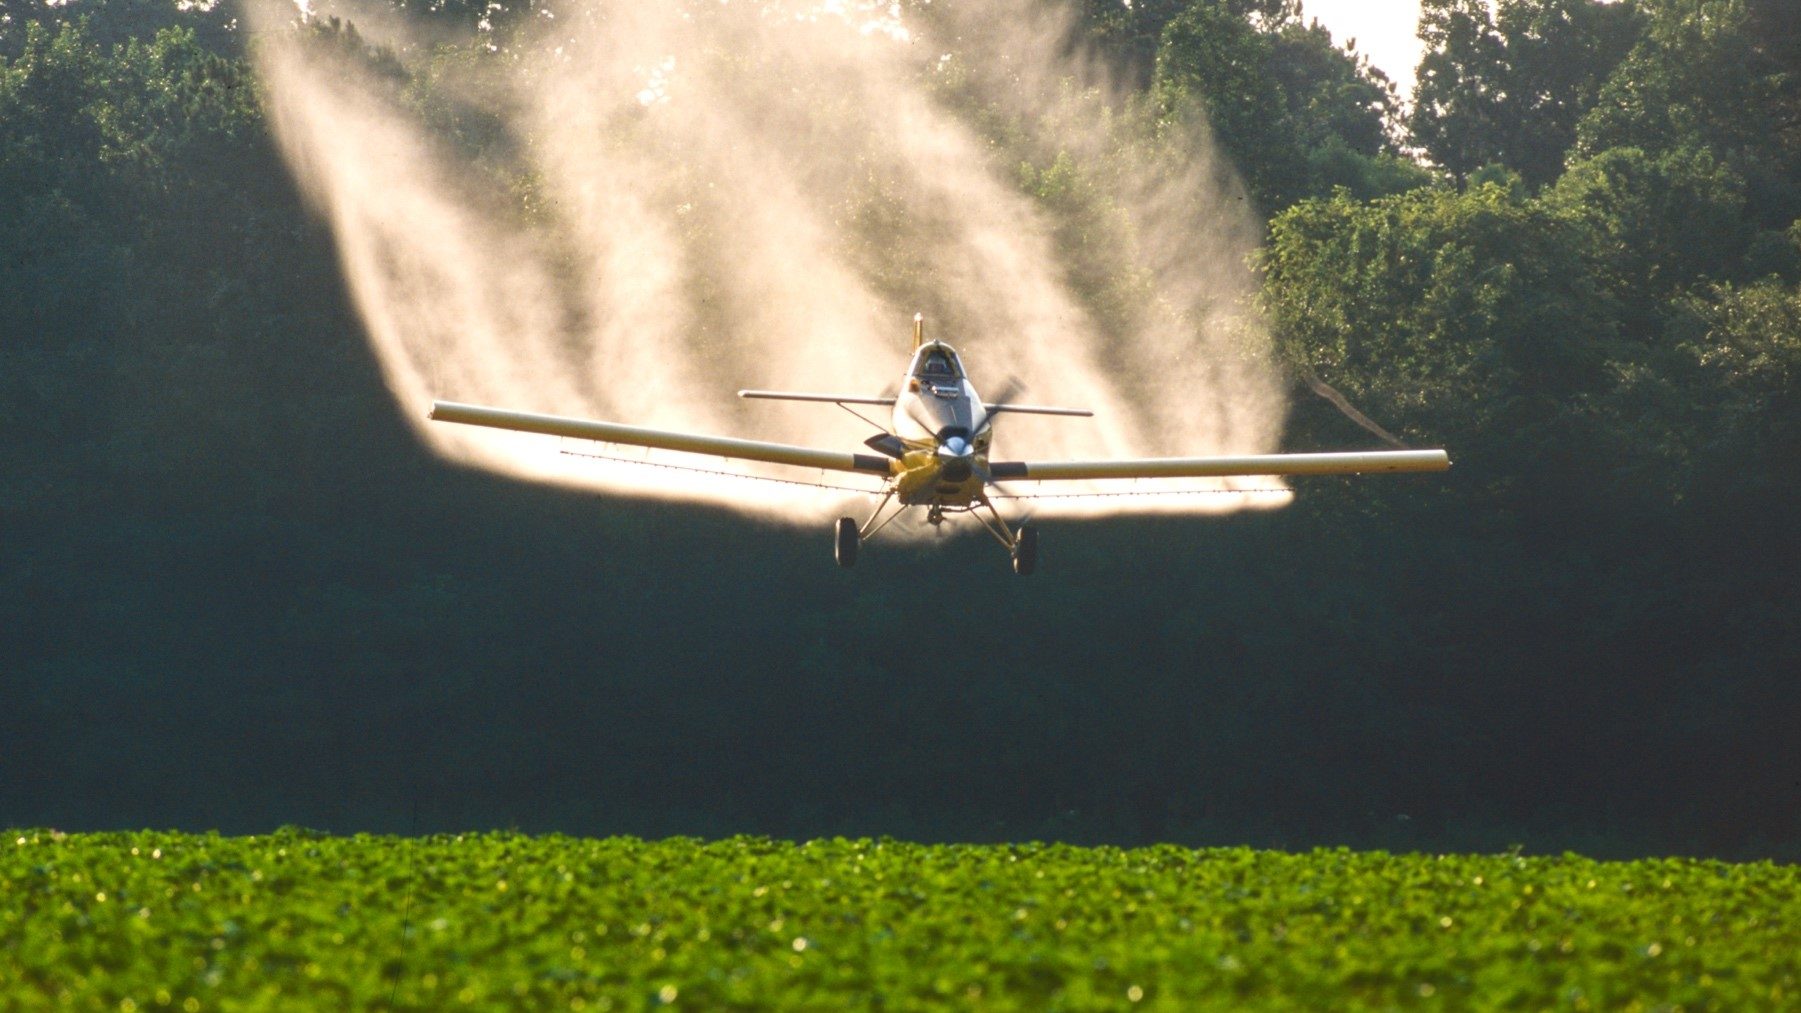 Crop duster plane spraying green field with chemicals.